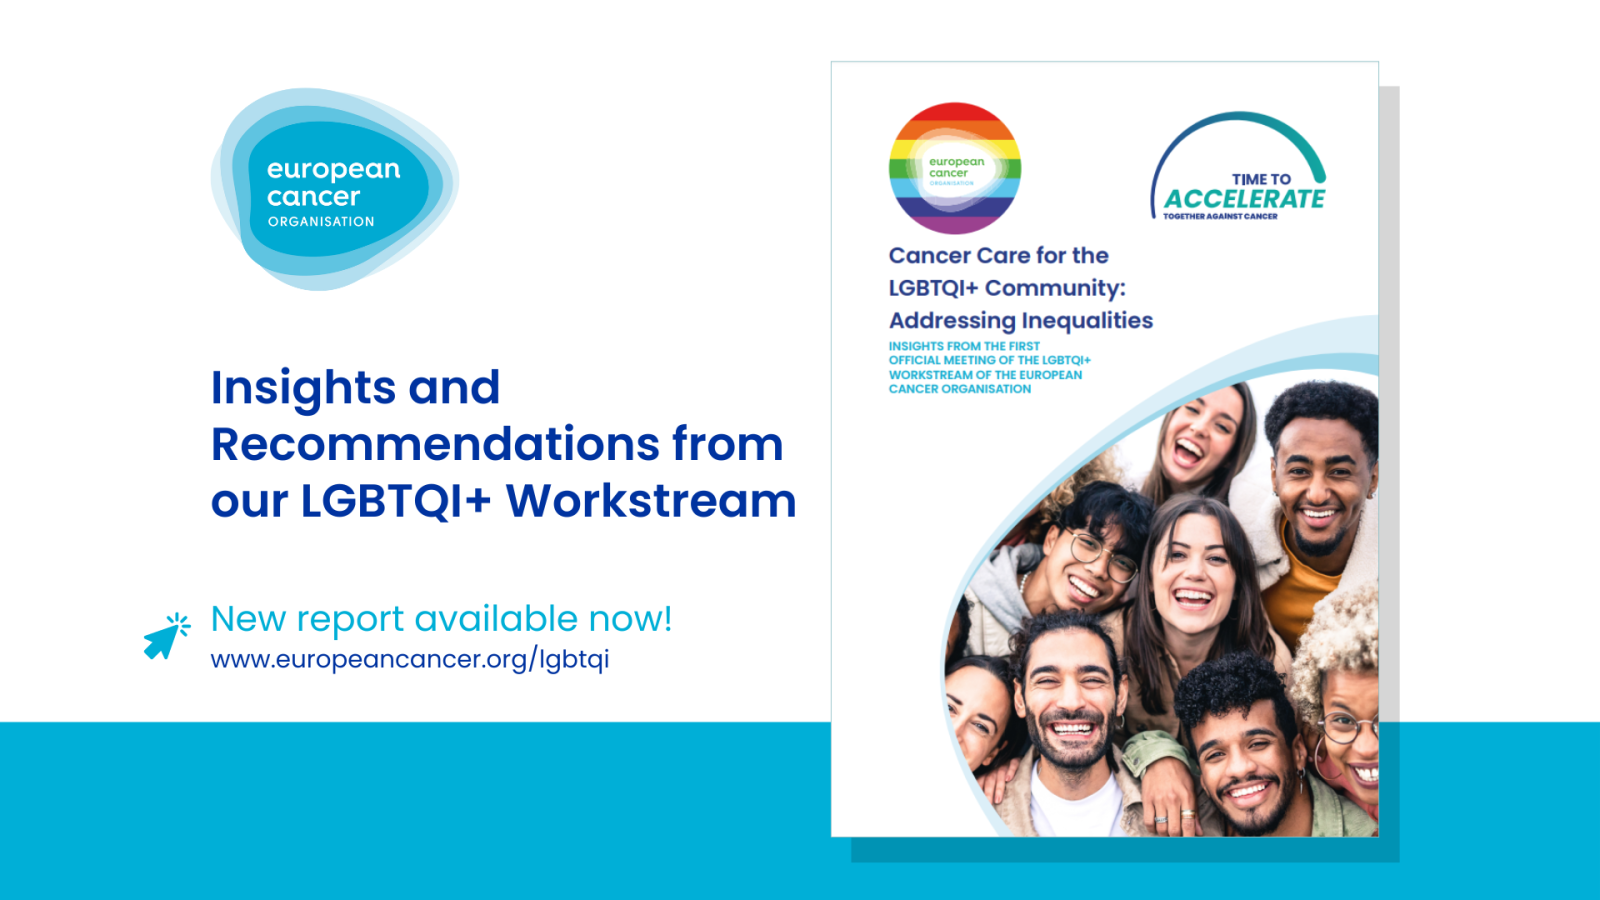 Cancer Care for the LGBTQI+ Community: Addressing Inequalities